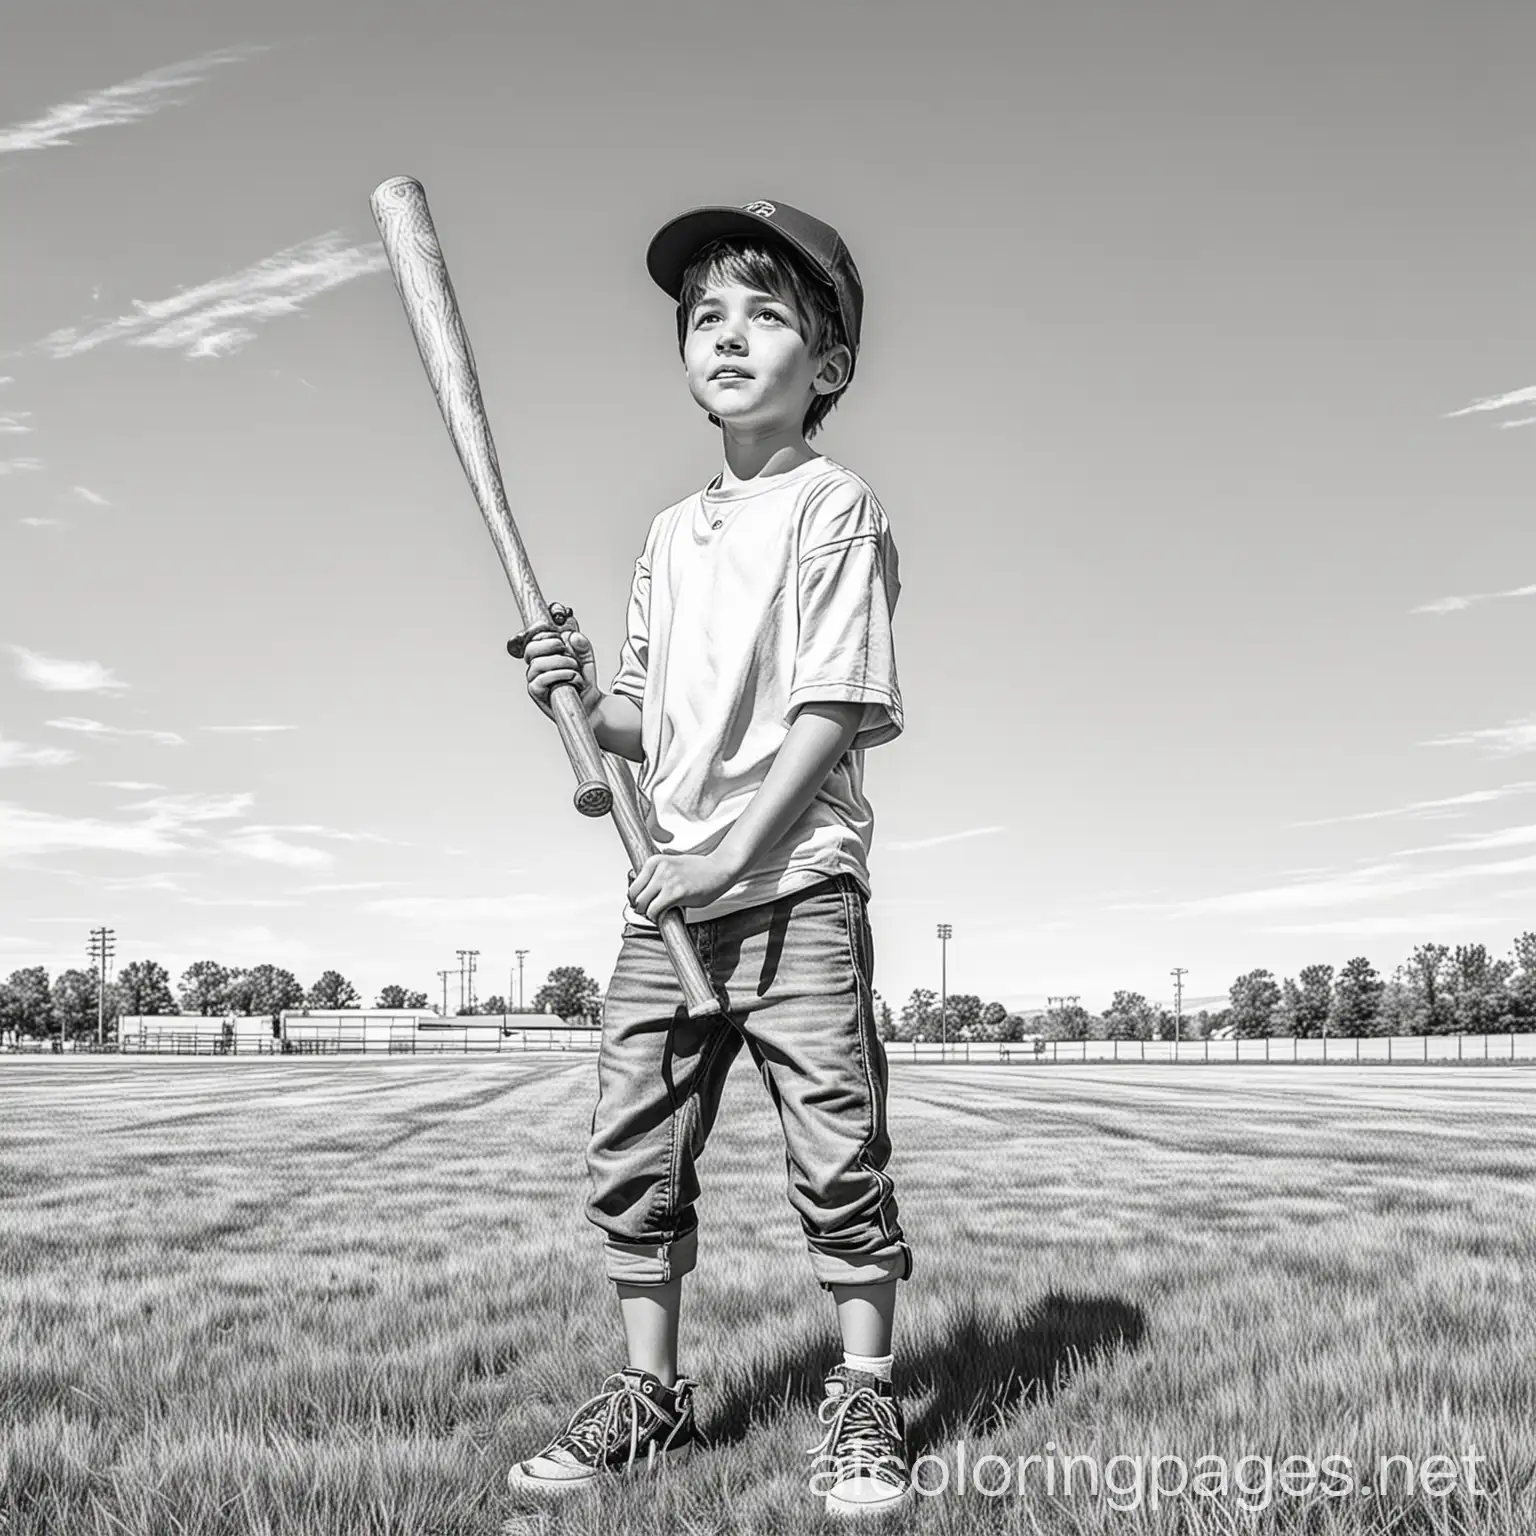 a young boy holding a baseball bat on top of a field

, Coloring Page, black and white, line art, white background, Simplicity, Ample White Space. The background of the coloring page is plain white to make it easy for young children to color within the lines. The outlines of all the subjects are easy to distinguish, making it simple for kids to color without too much difficulty